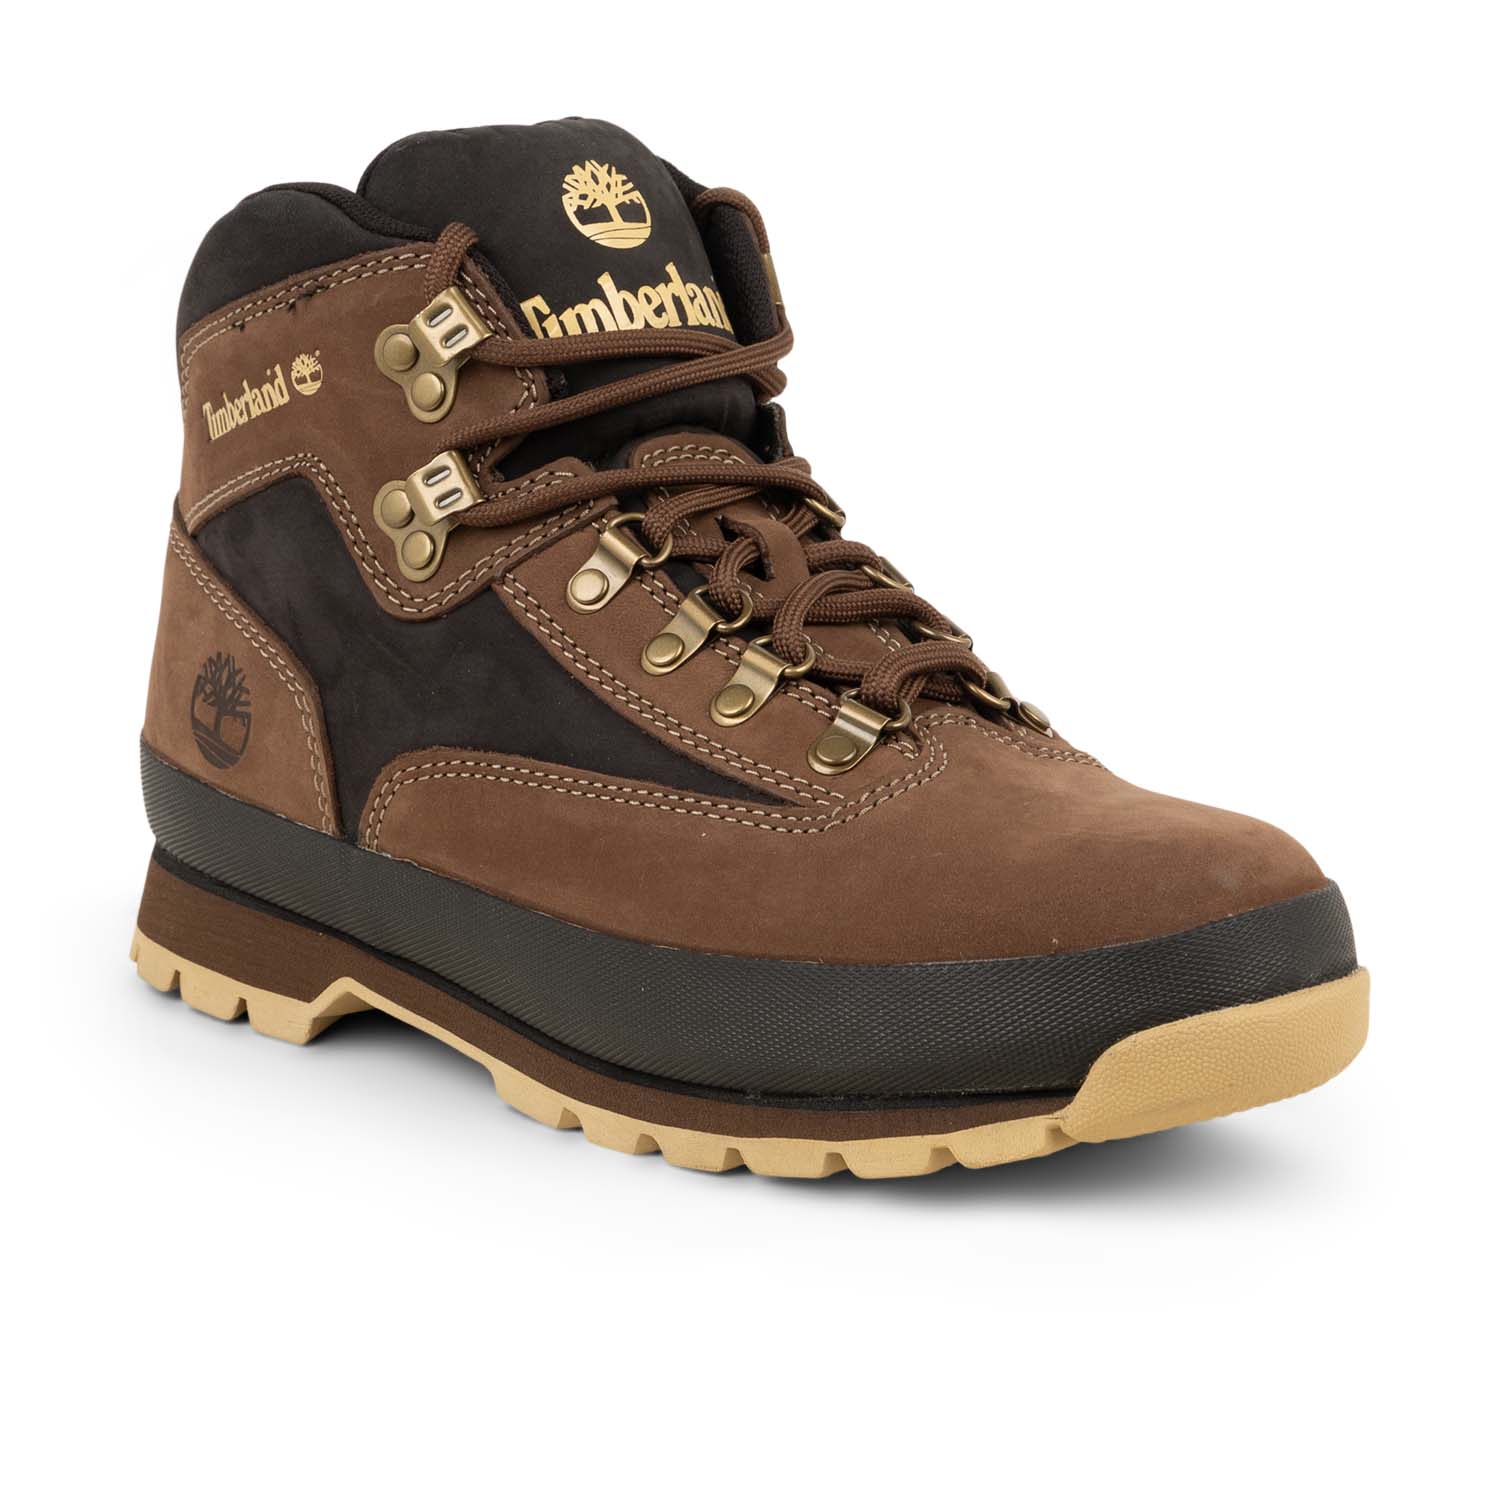 02 - EURO HIKER - TIMBERLAND - Chaussures à lacets - Nubuck